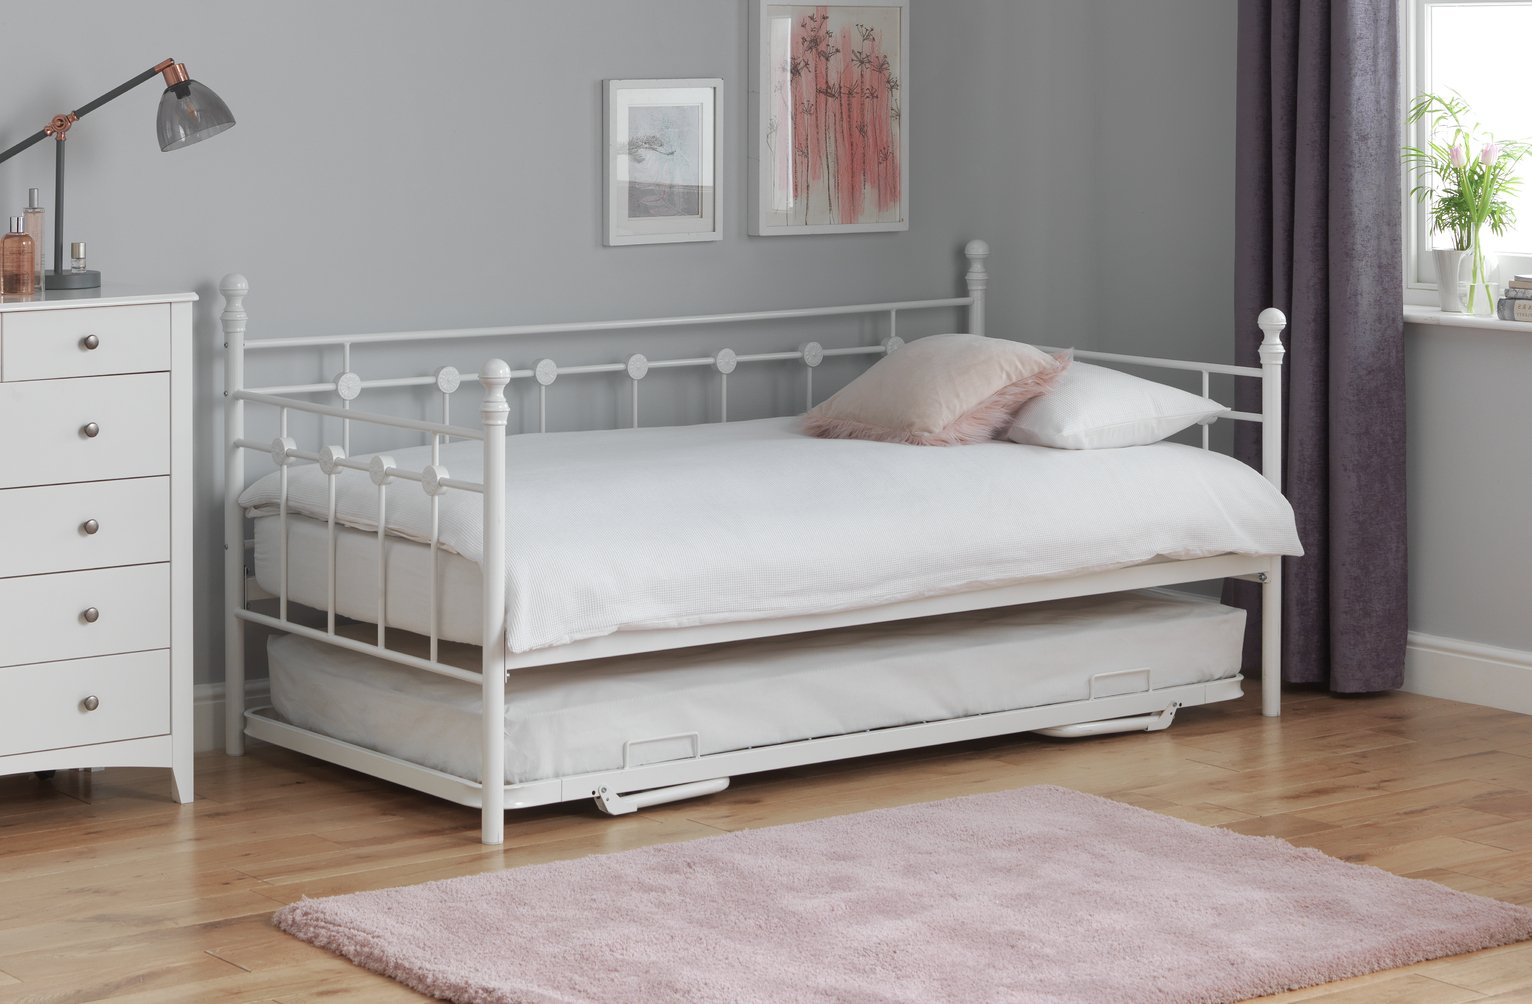 Argos Home Abigail Metal Daybed and Trundle - White